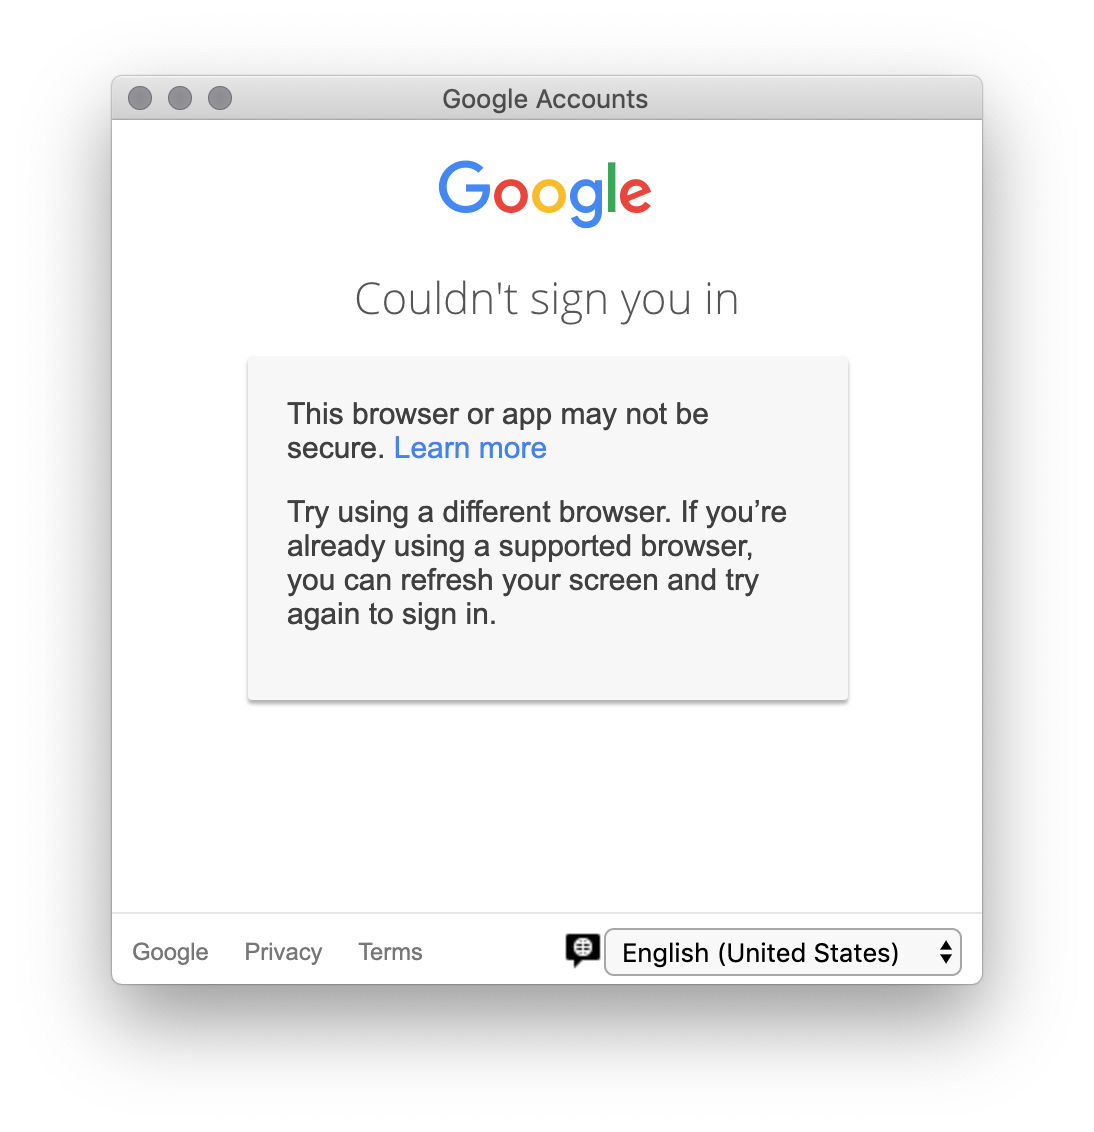 [Google: Couldn't sign you in. This browser or app may not be supported. Try using a different browser. If you're already using a supported browser, you can refresh your screen and try again to sign in.]